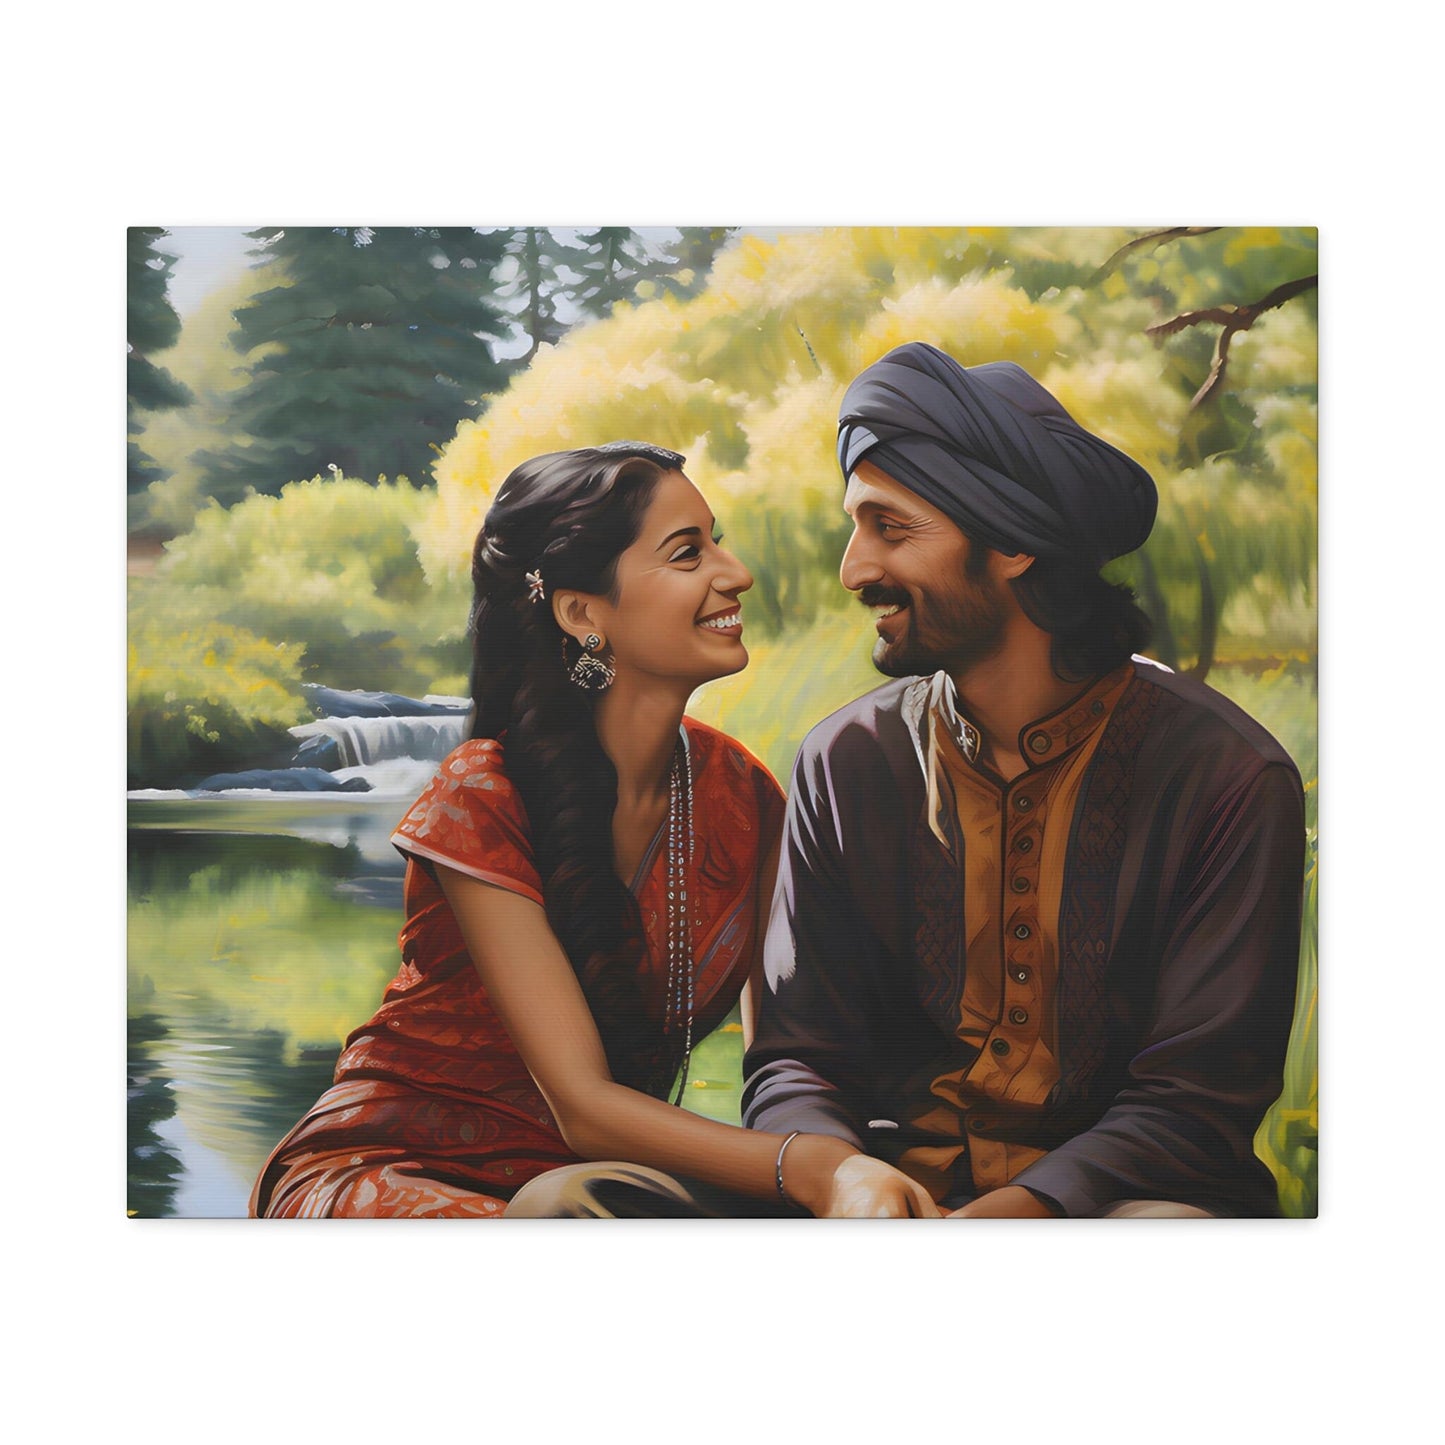 image 5 Canvas by Aravind Patel depicting a young Indian couple enjoying a serene moment in a park, surrounded by tall trees and a reflective pond, capturing the essence of romantic serenity.